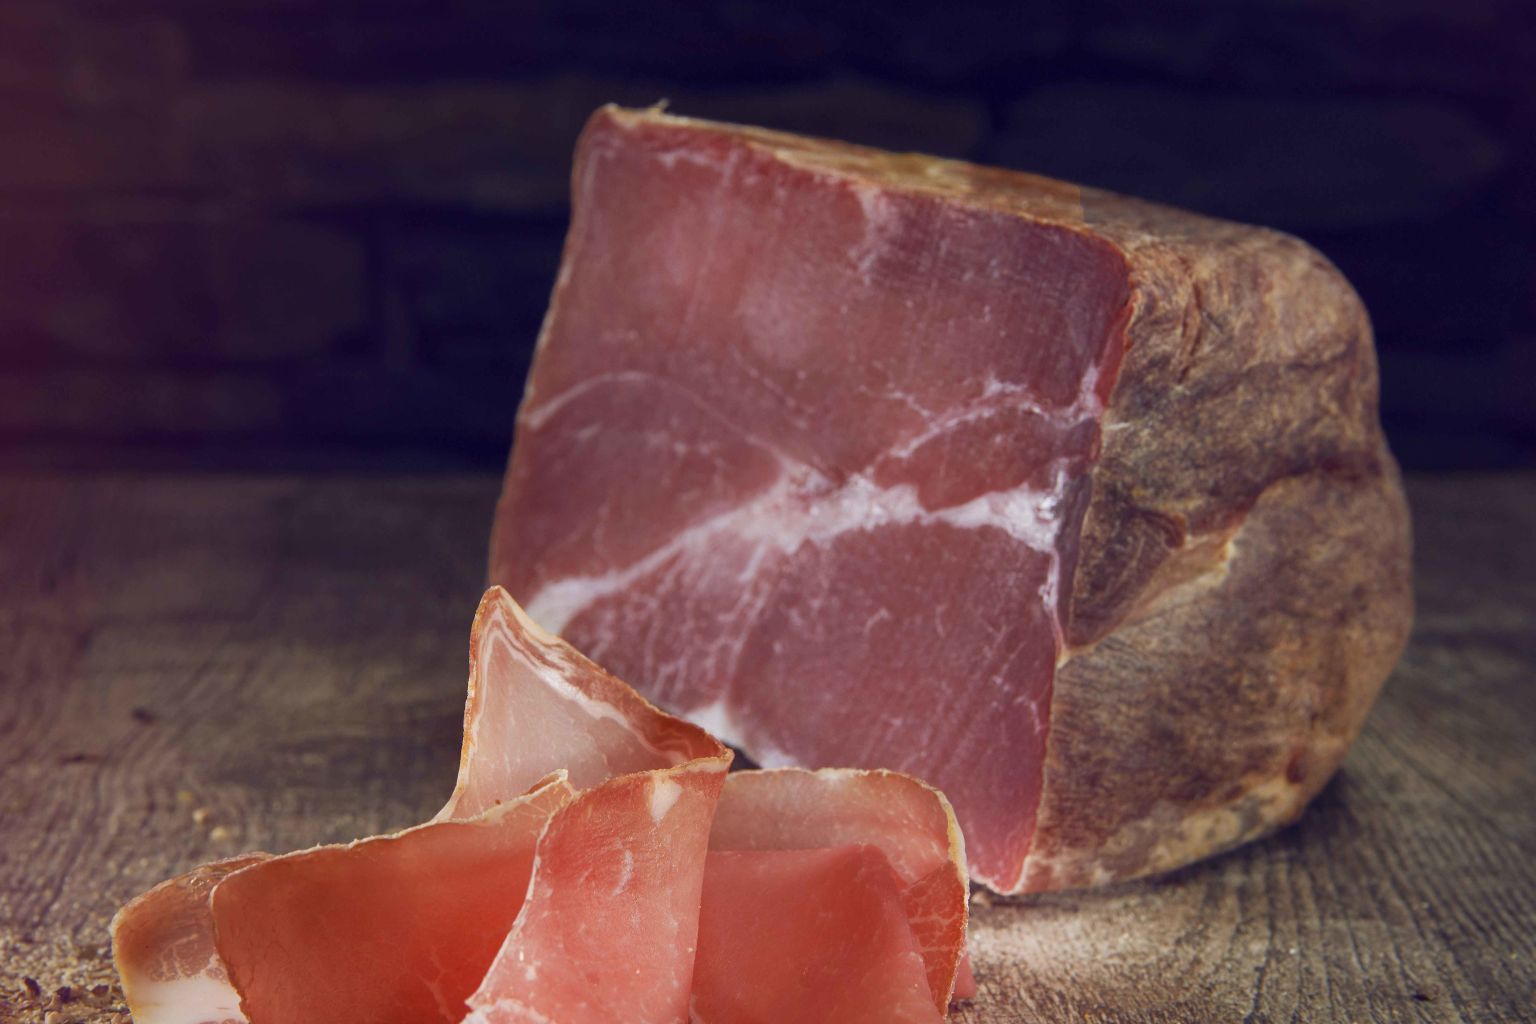 Raw ham from the Valais after drying for several weeks, Valais Wallis, Schweiz Suisse